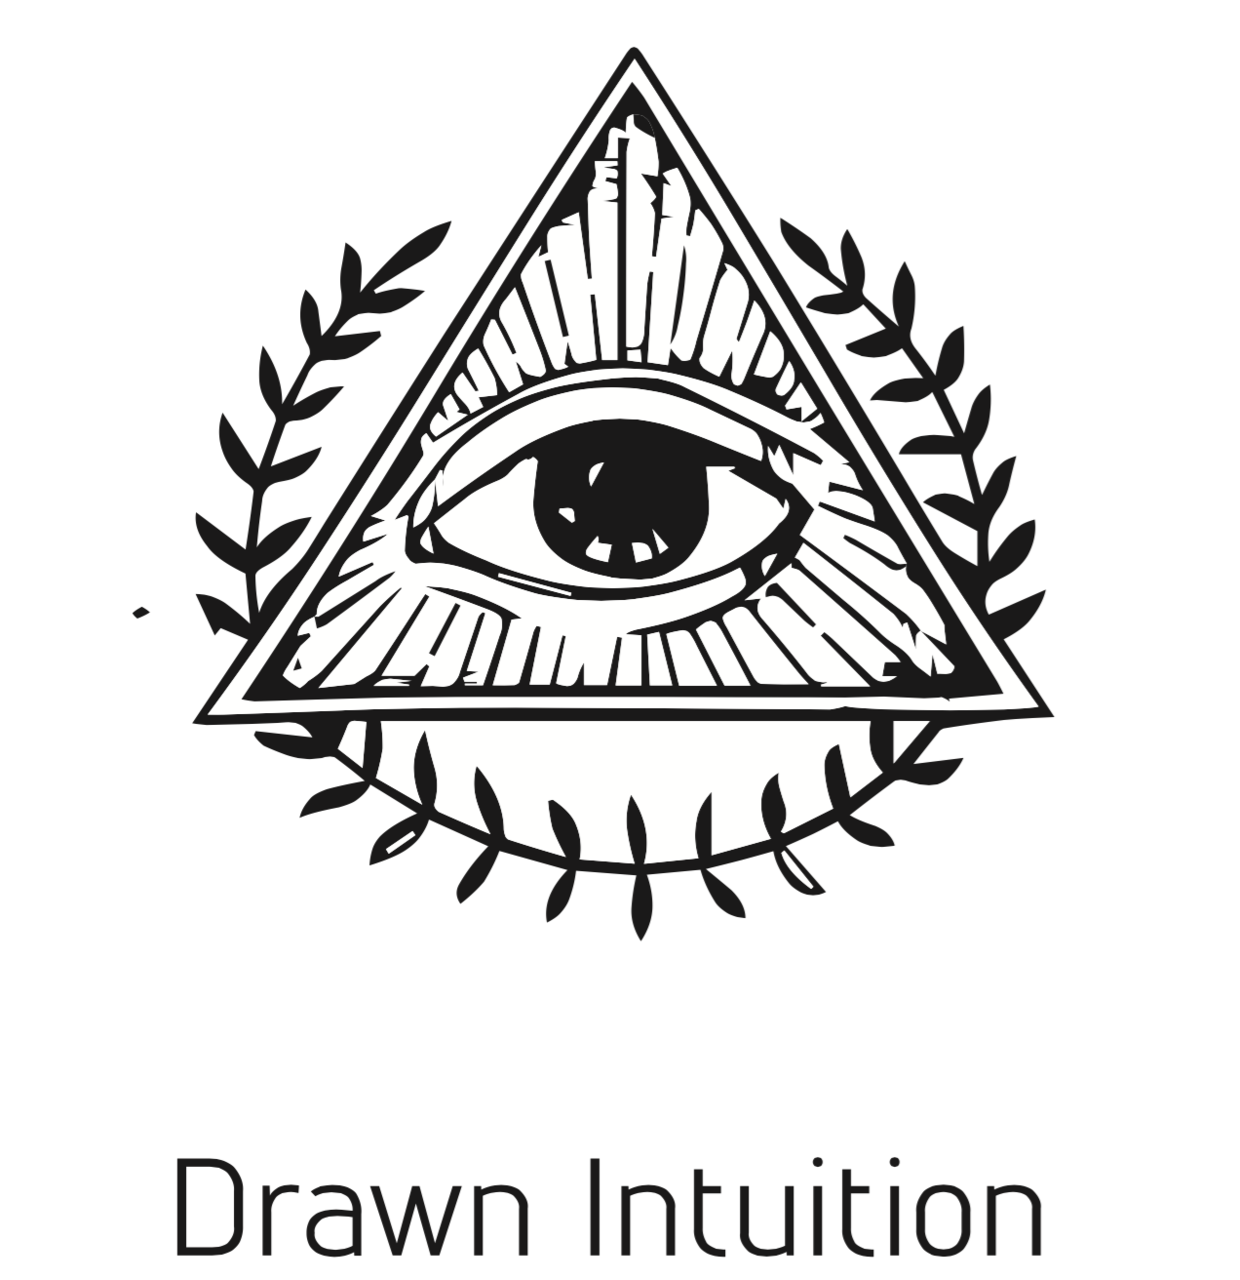 Drawn Intuition by Tom Hodgson (Full Download)